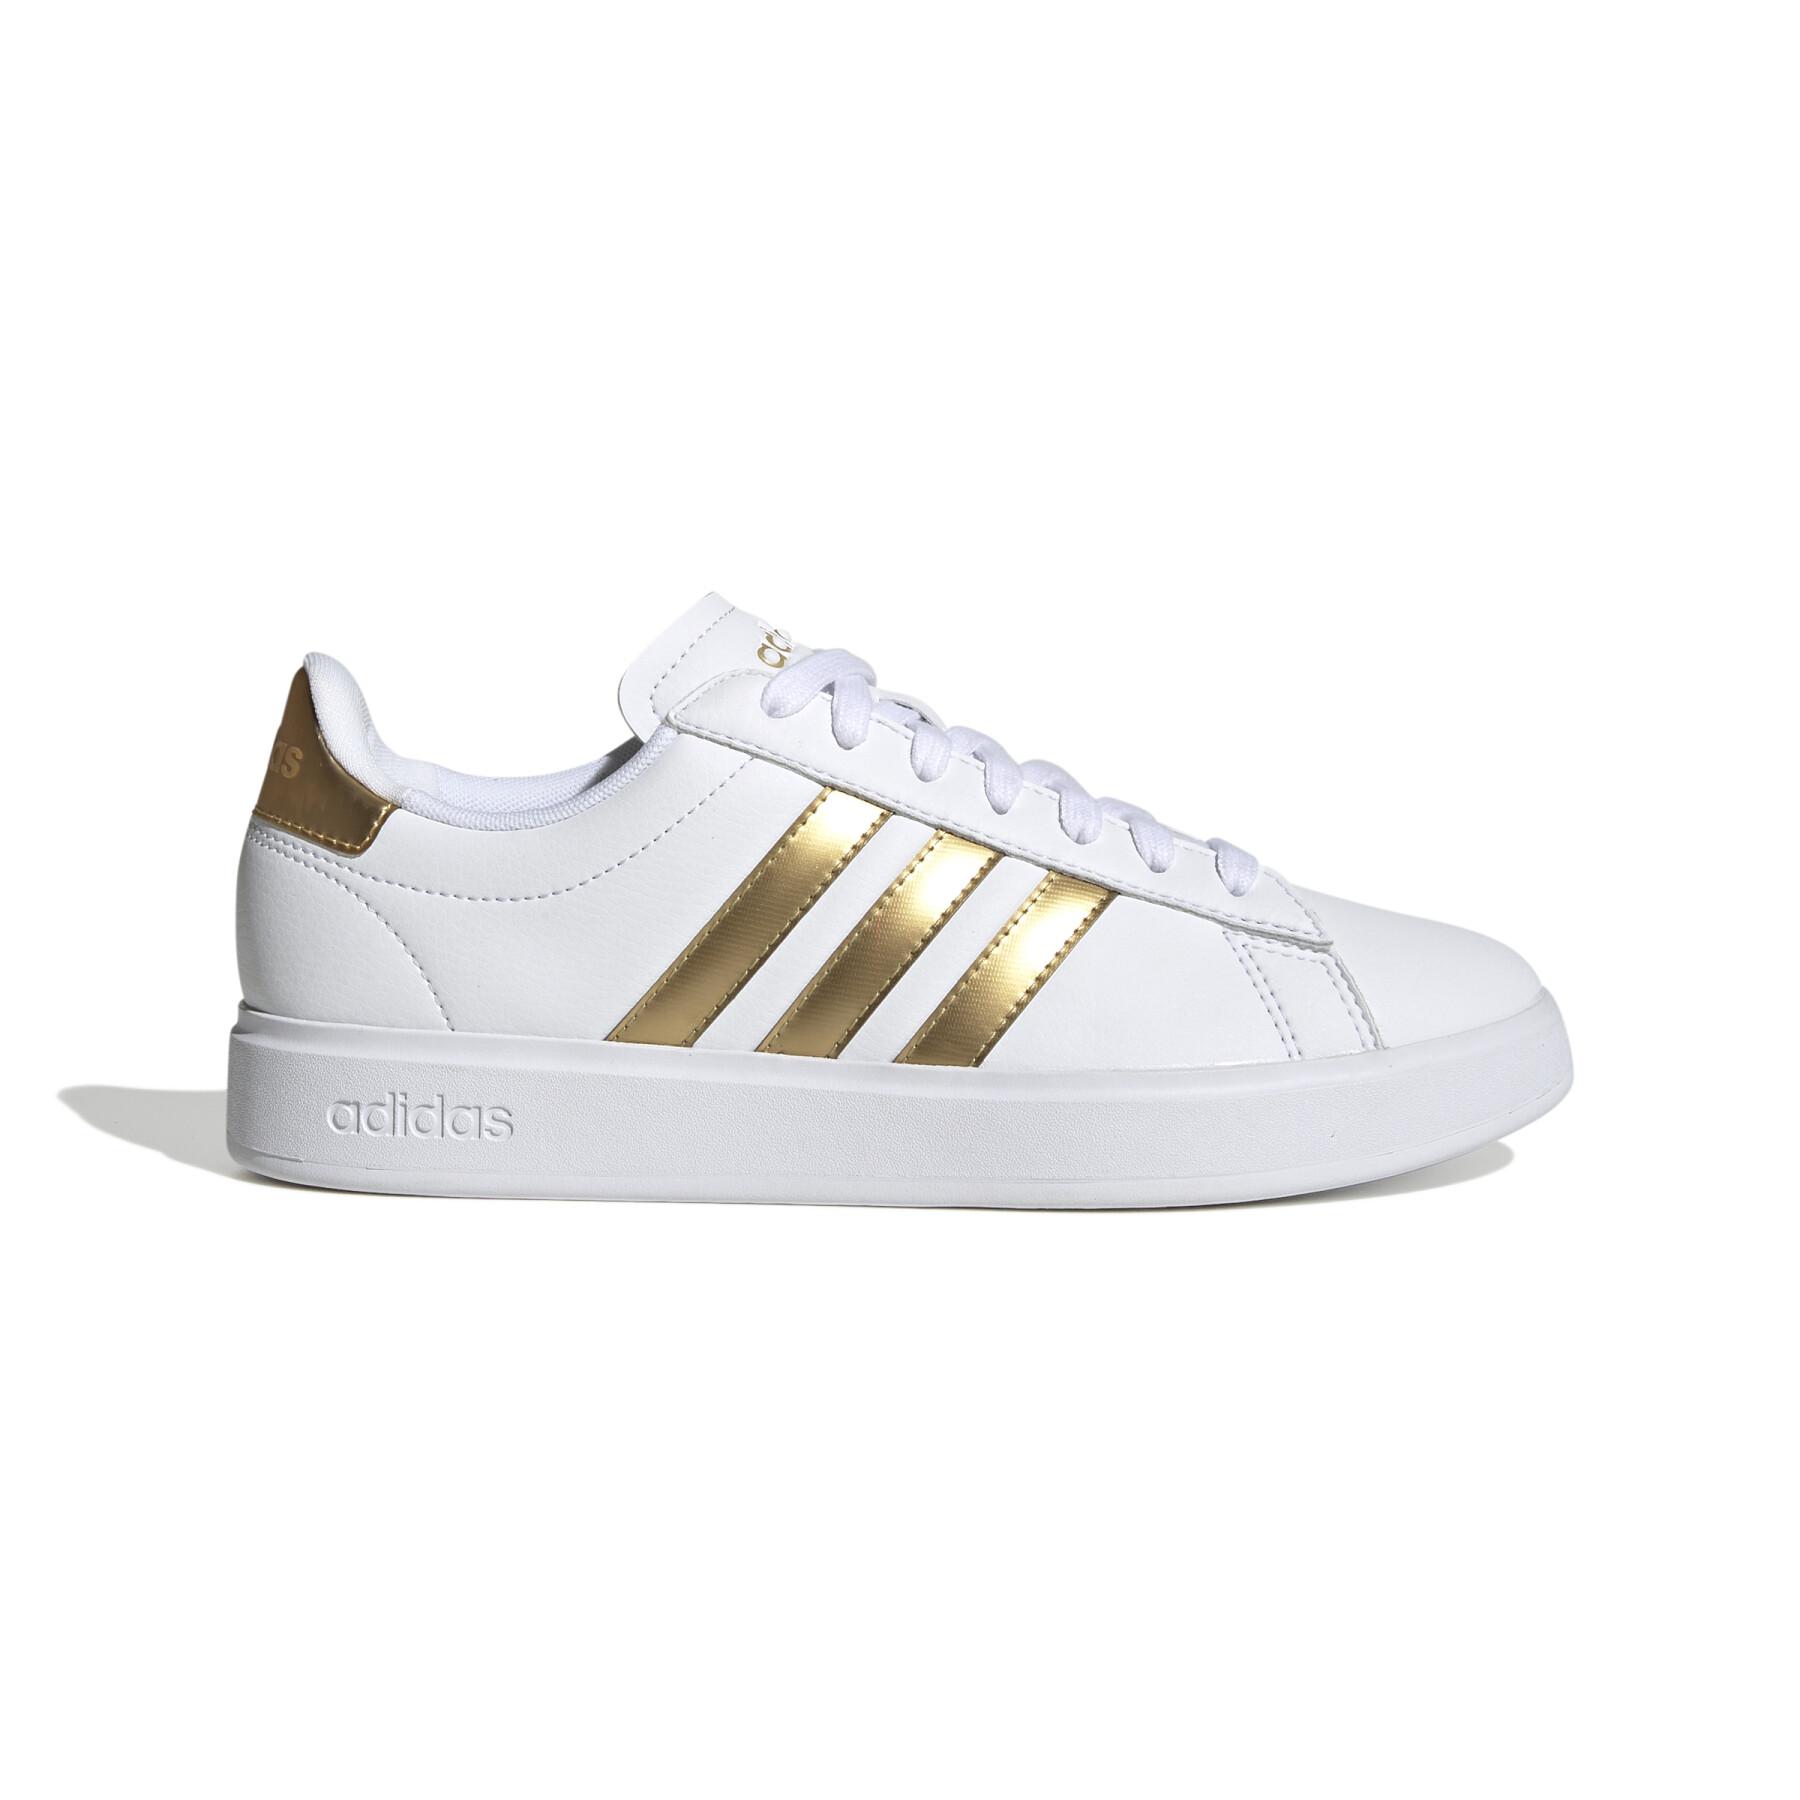 Baskets femme adidas Grand Court 2.0 - Sneakers Femme - Lifestyle